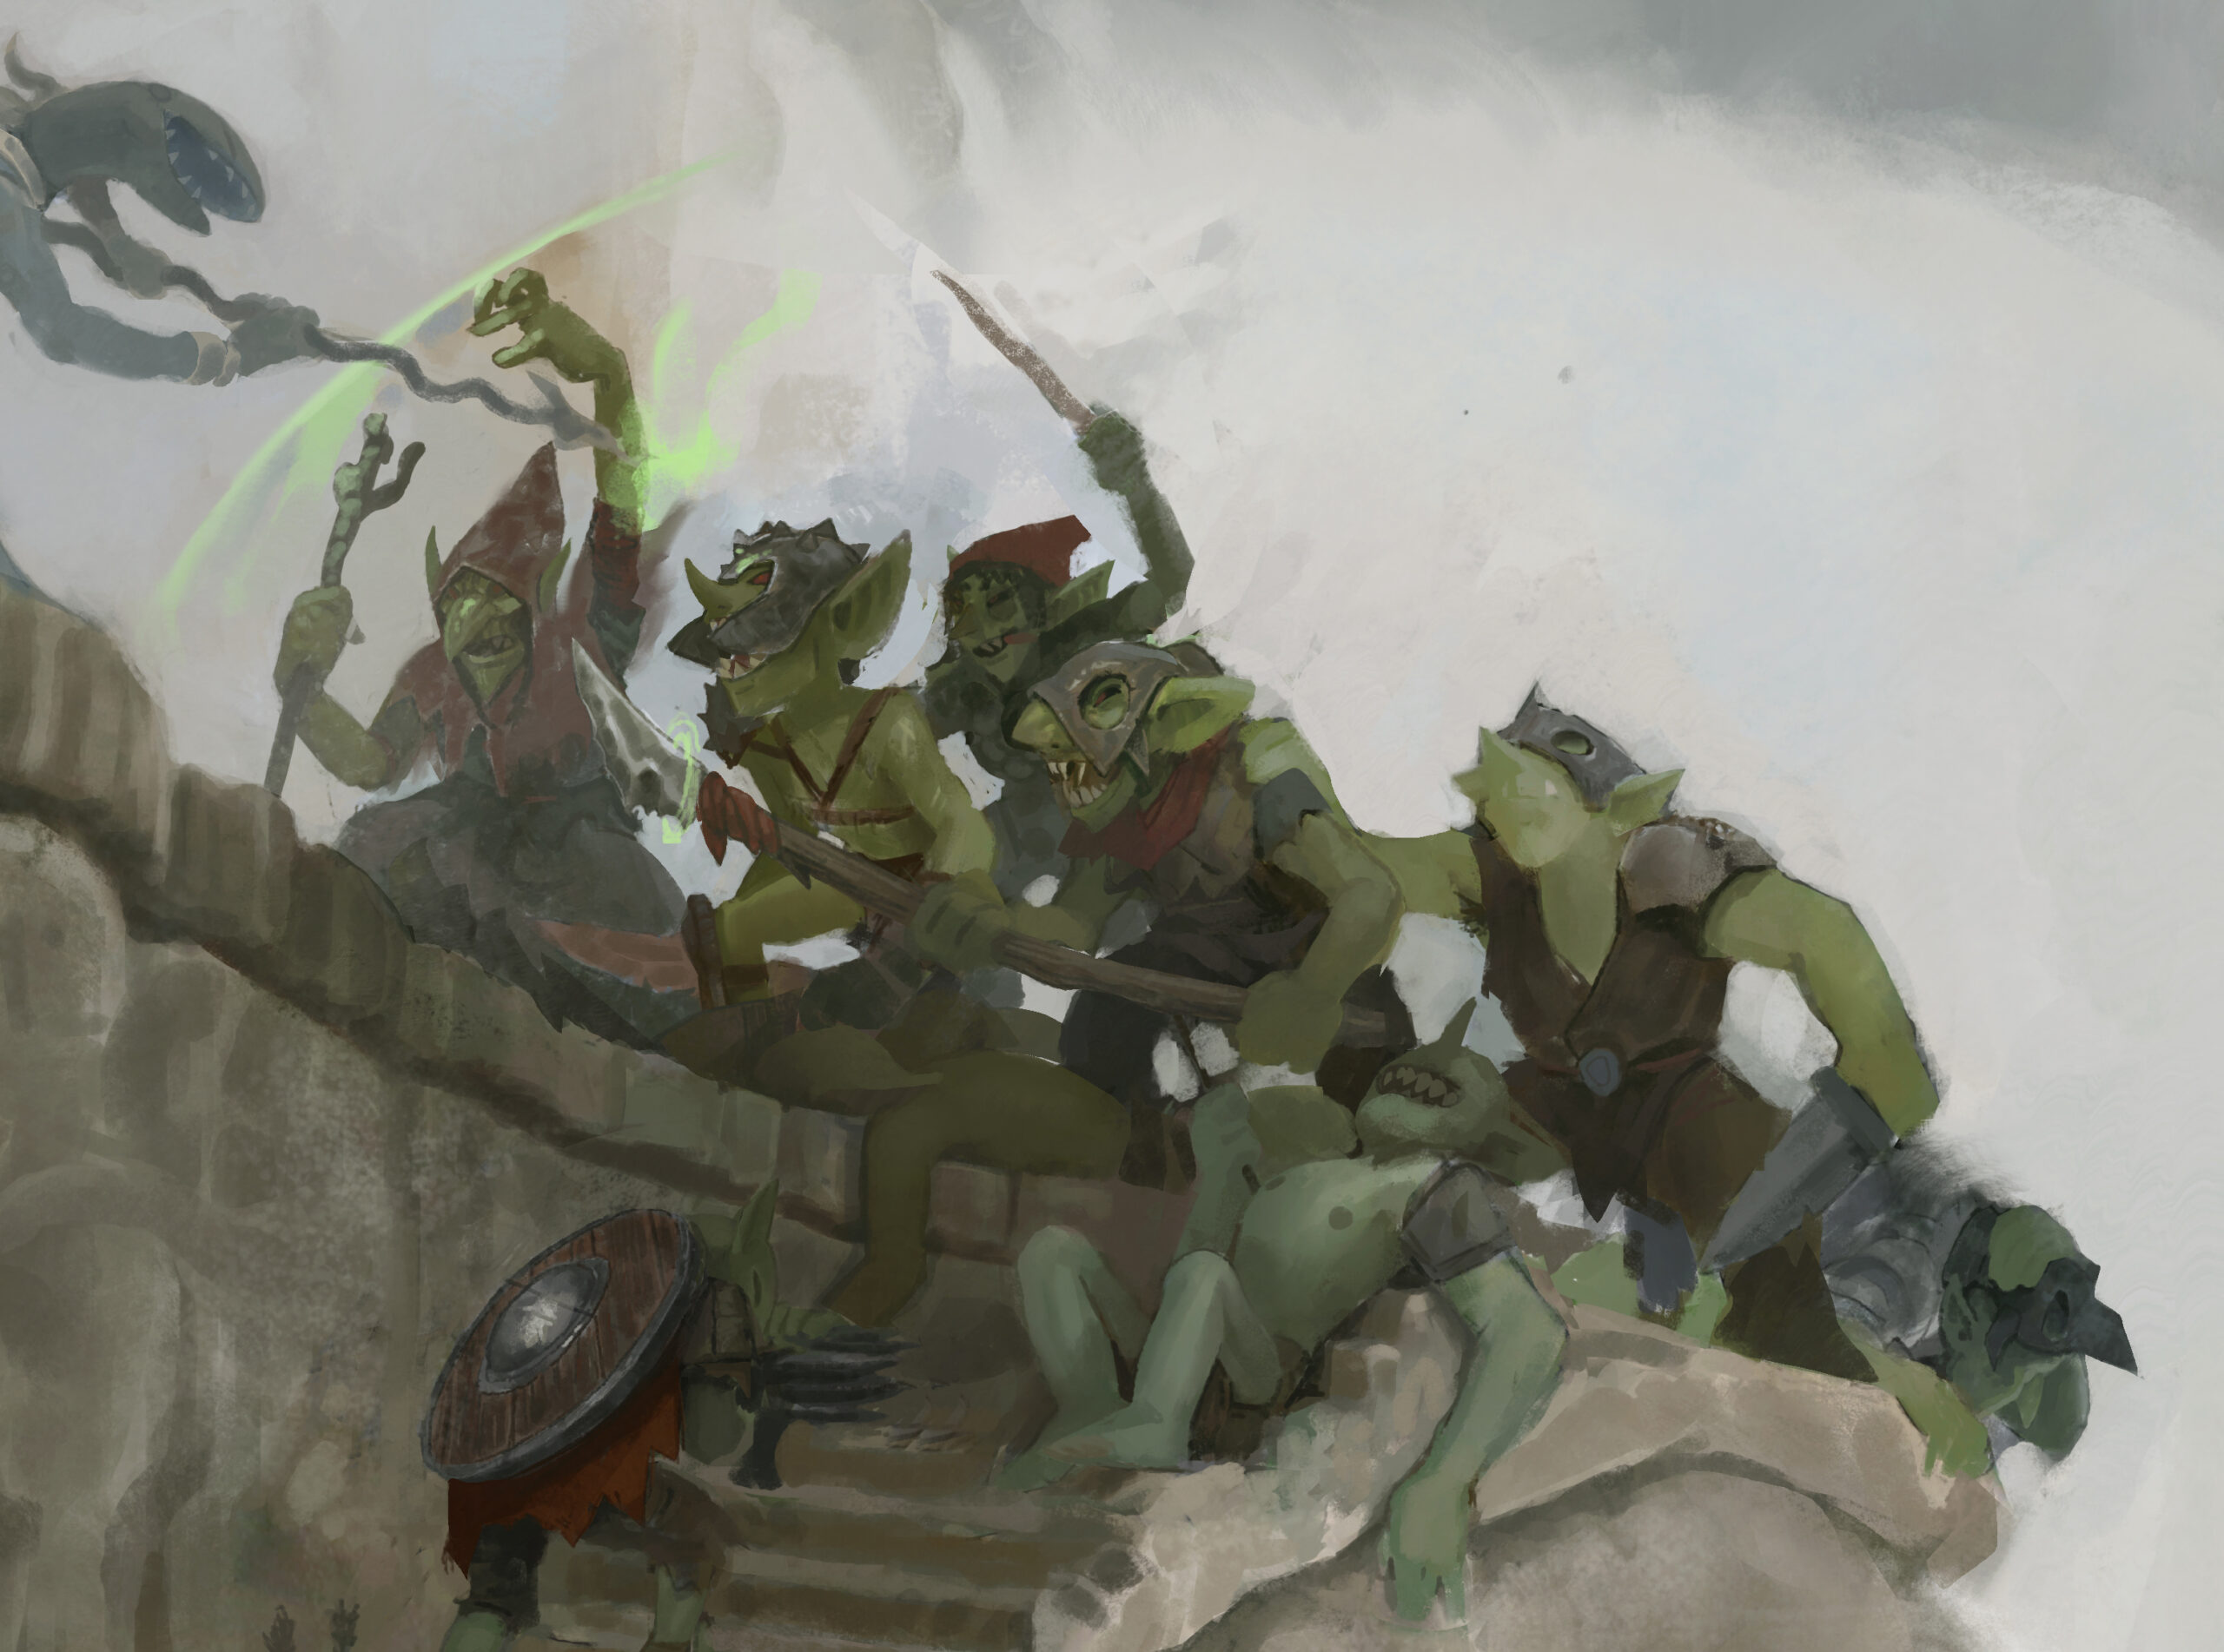 armoured goblins in combat with lizardmen on a cliffside